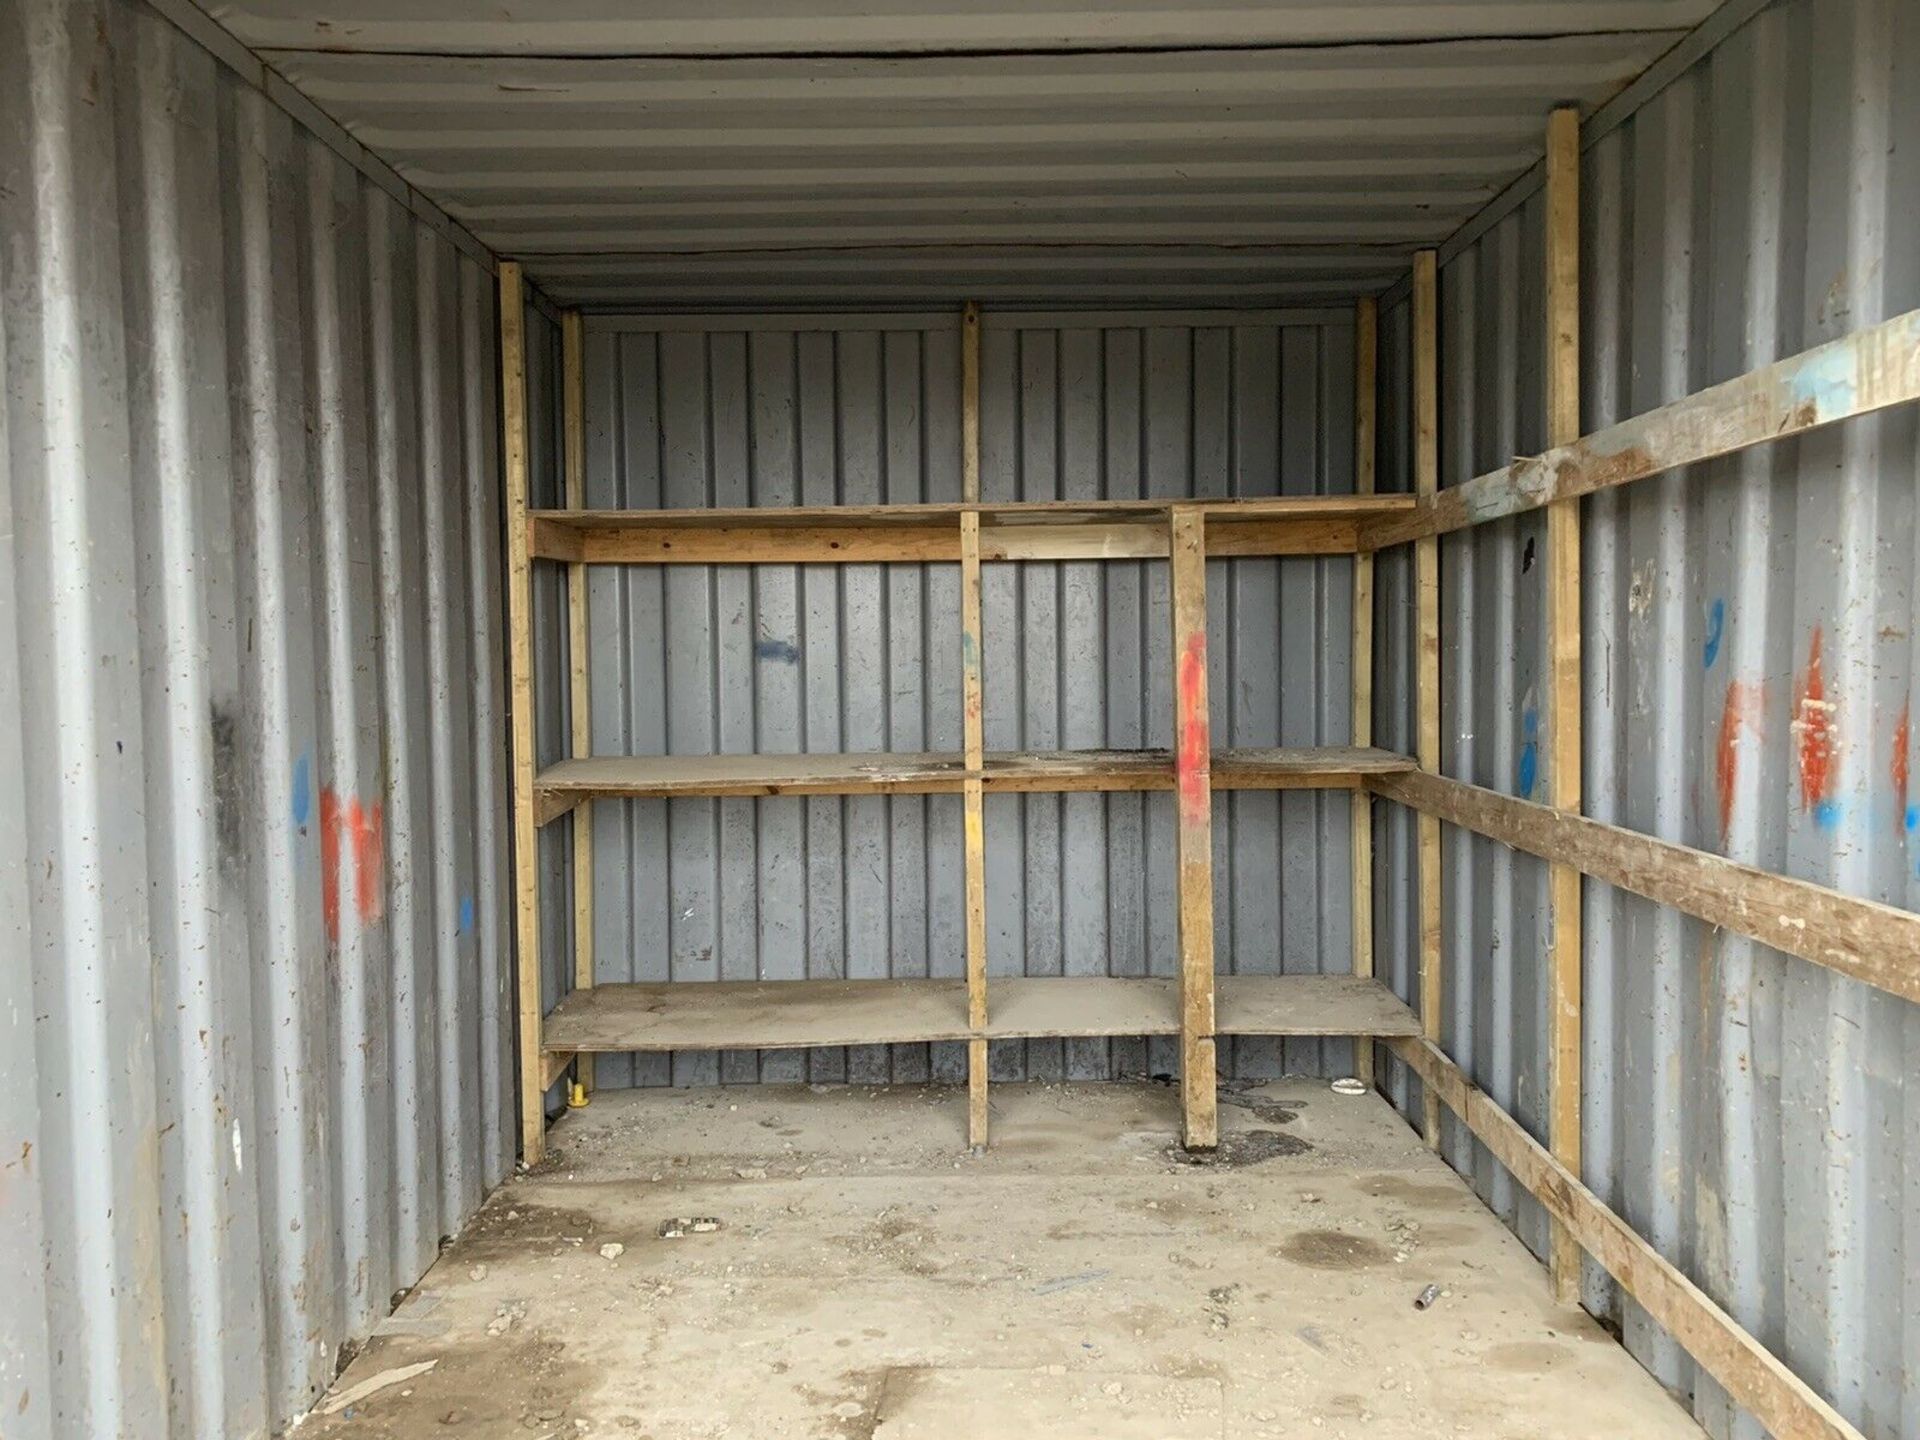 Office / Storage Container. Anti Vandal - Image 5 of 8